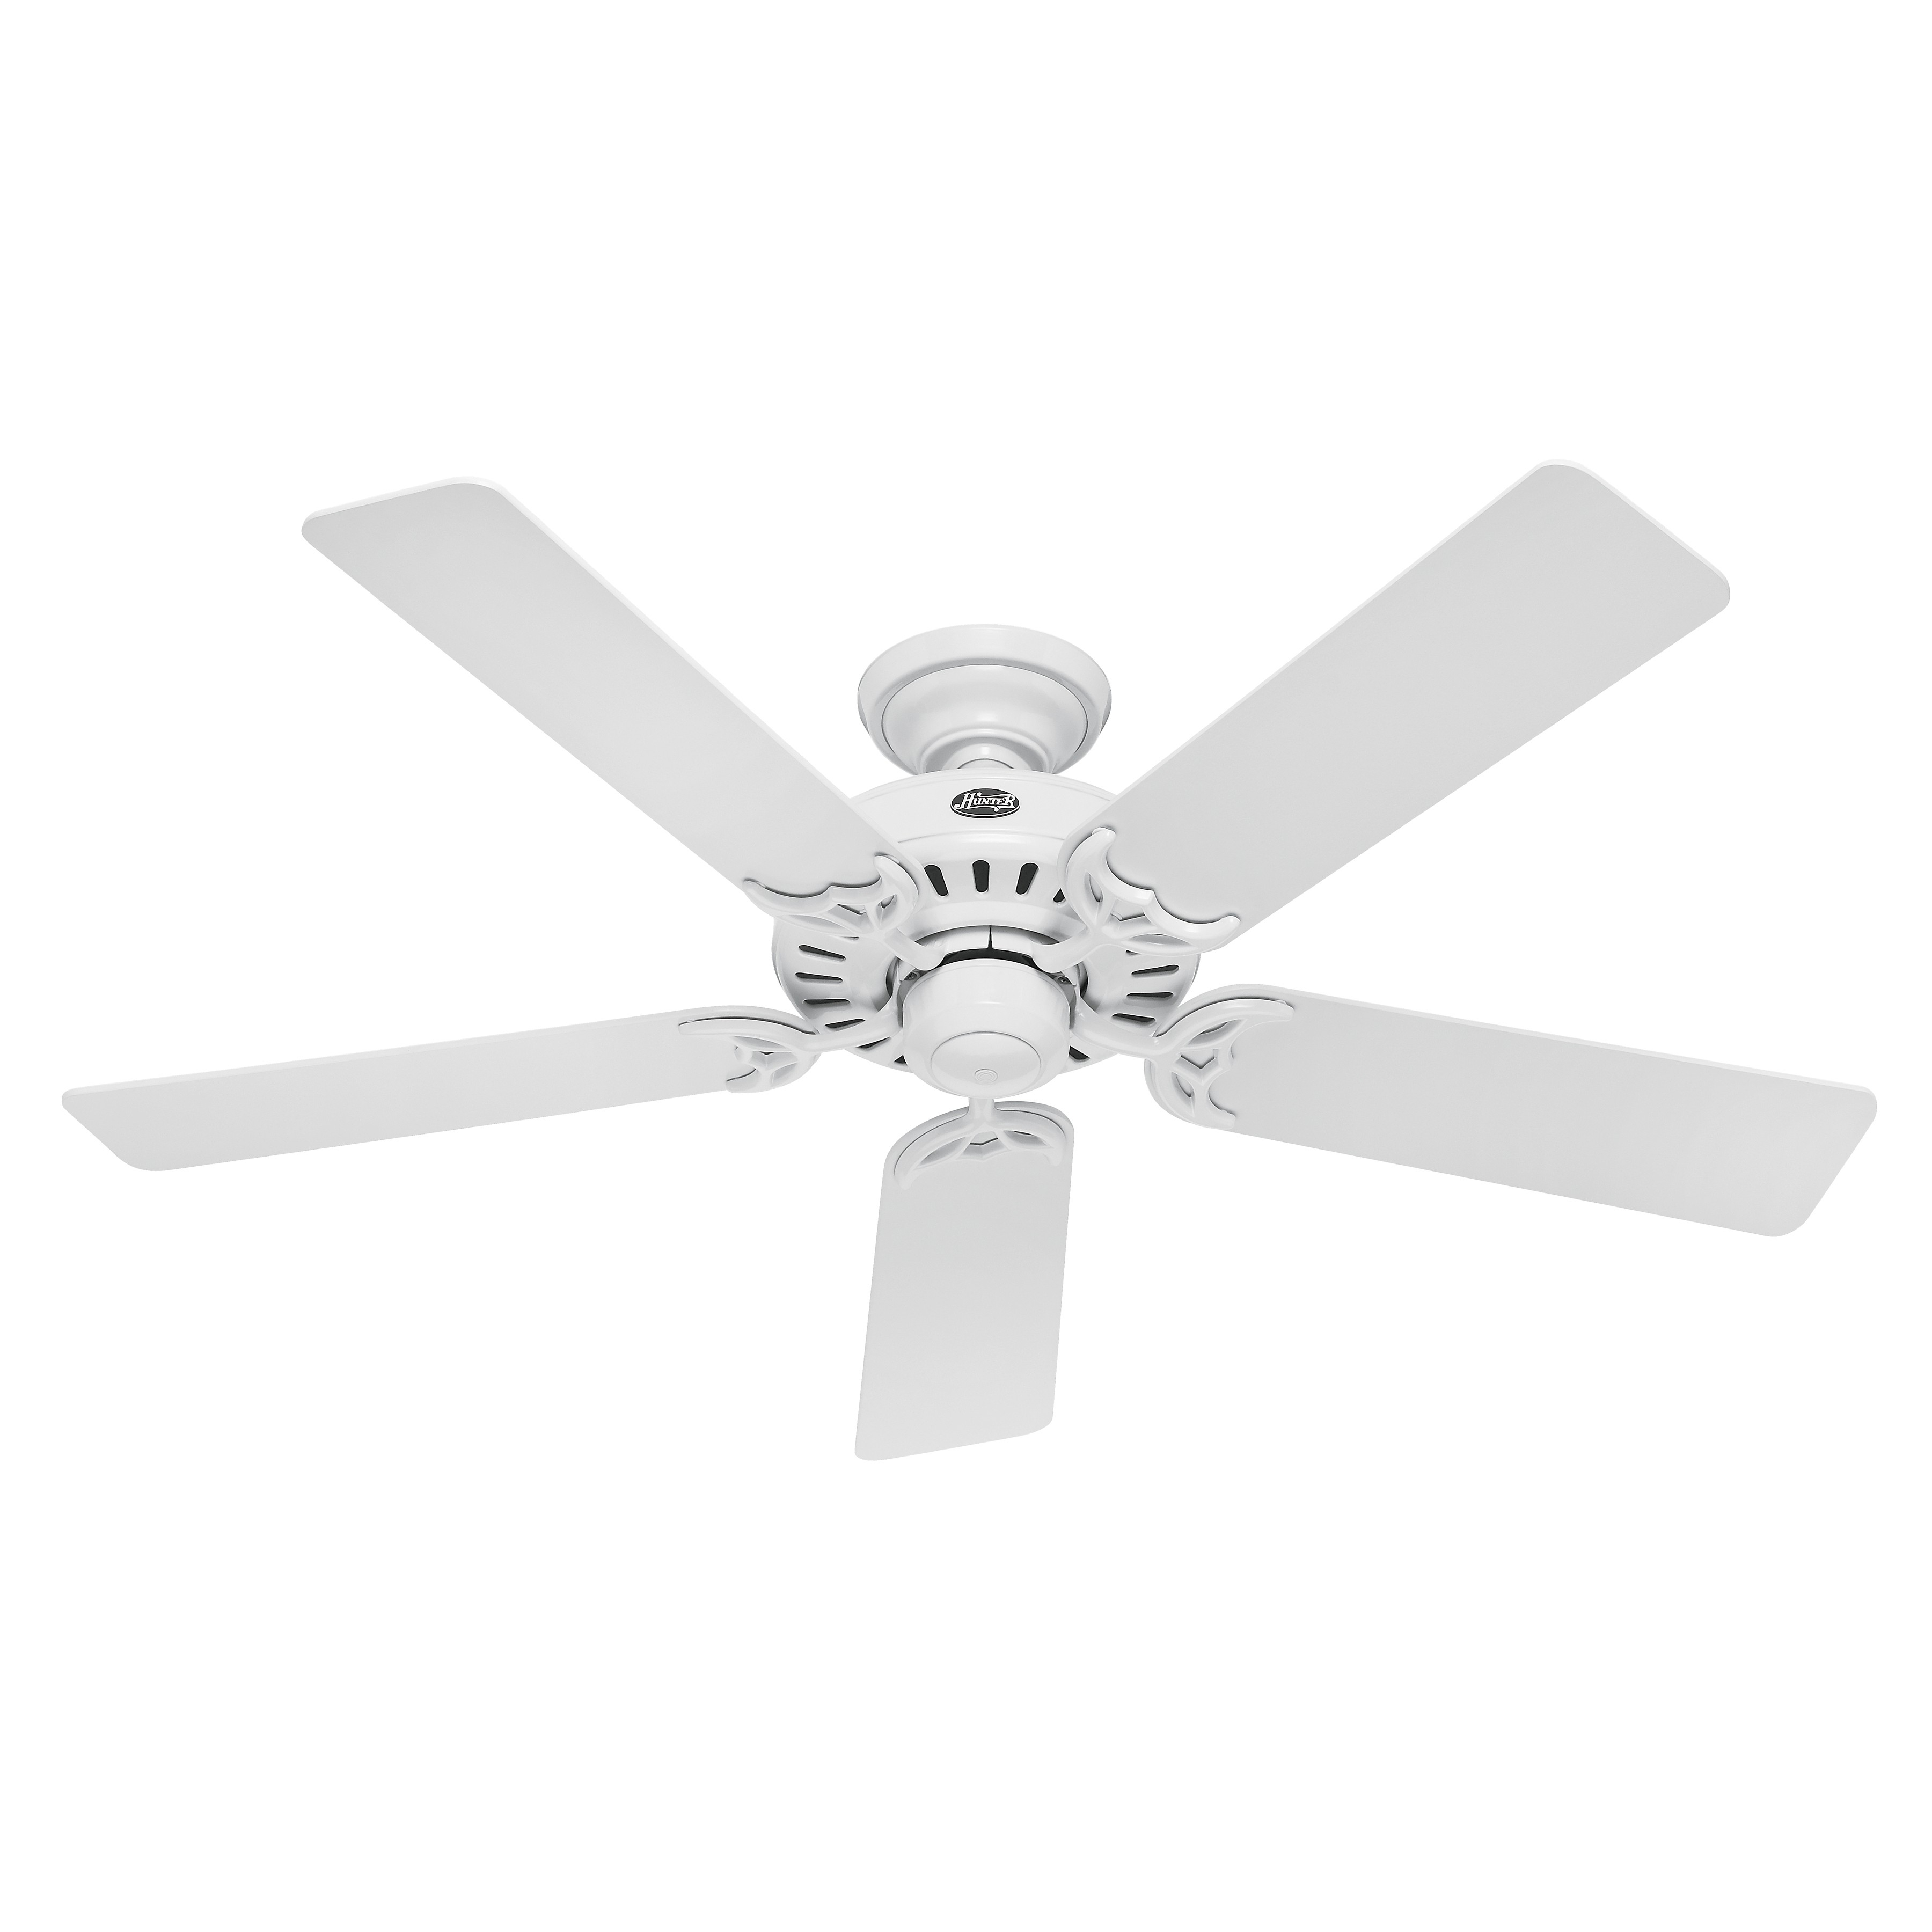 52 White Ceiling Fan No Lighthunter 52 inch energy star rated white finish ceiling fan